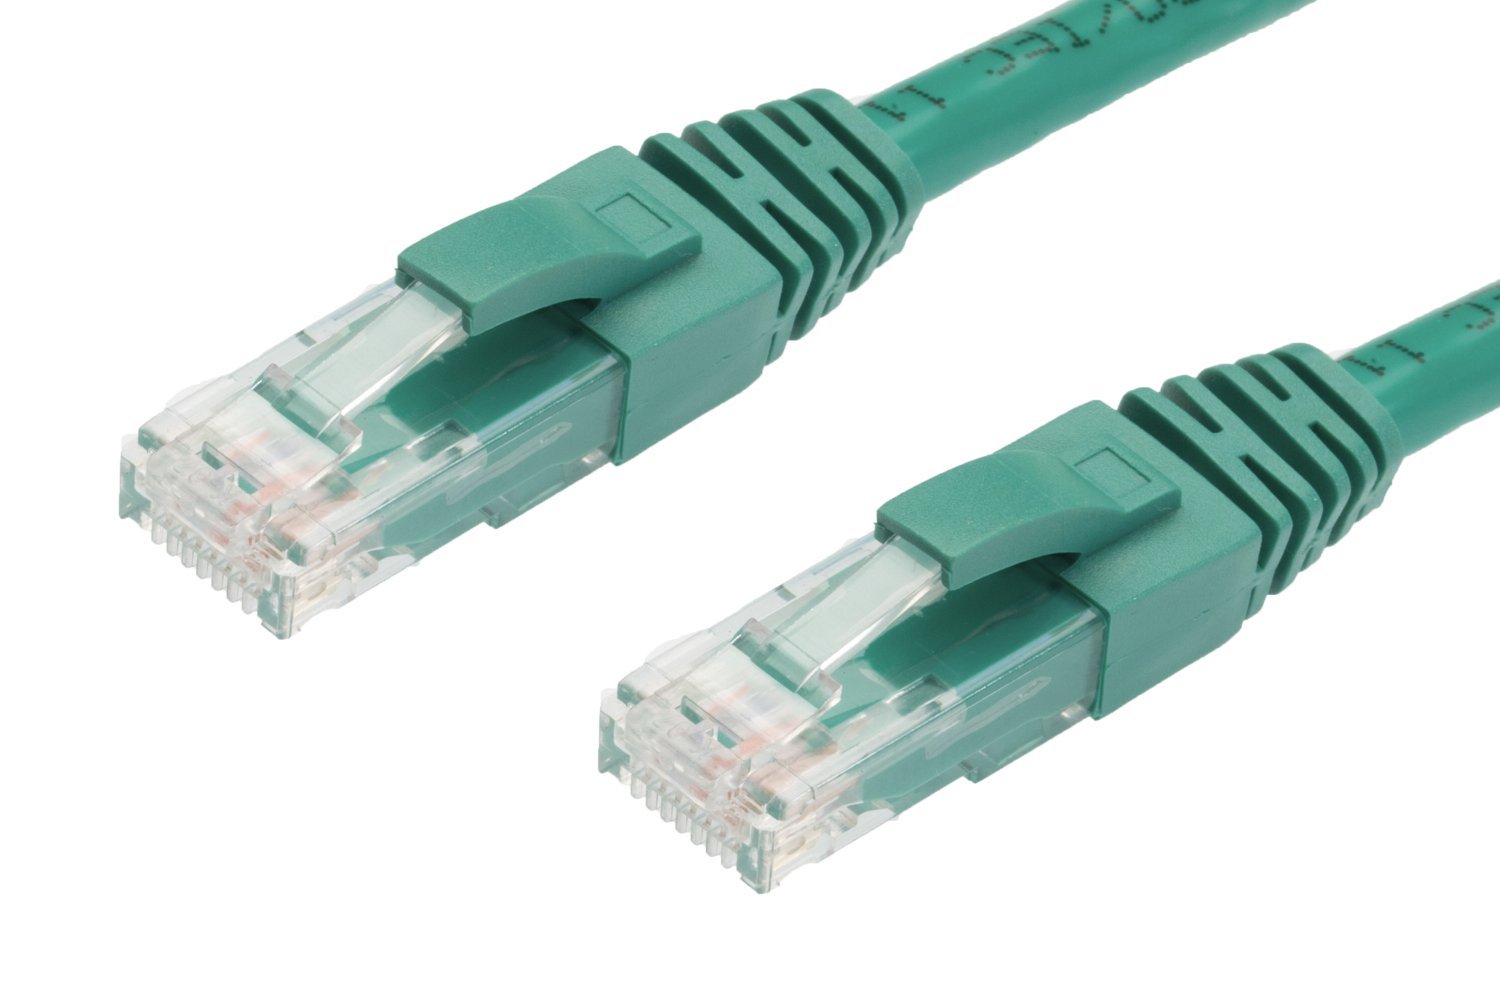 4Cabling 0.5M Cat 5E Ethernet Network Cable: Green